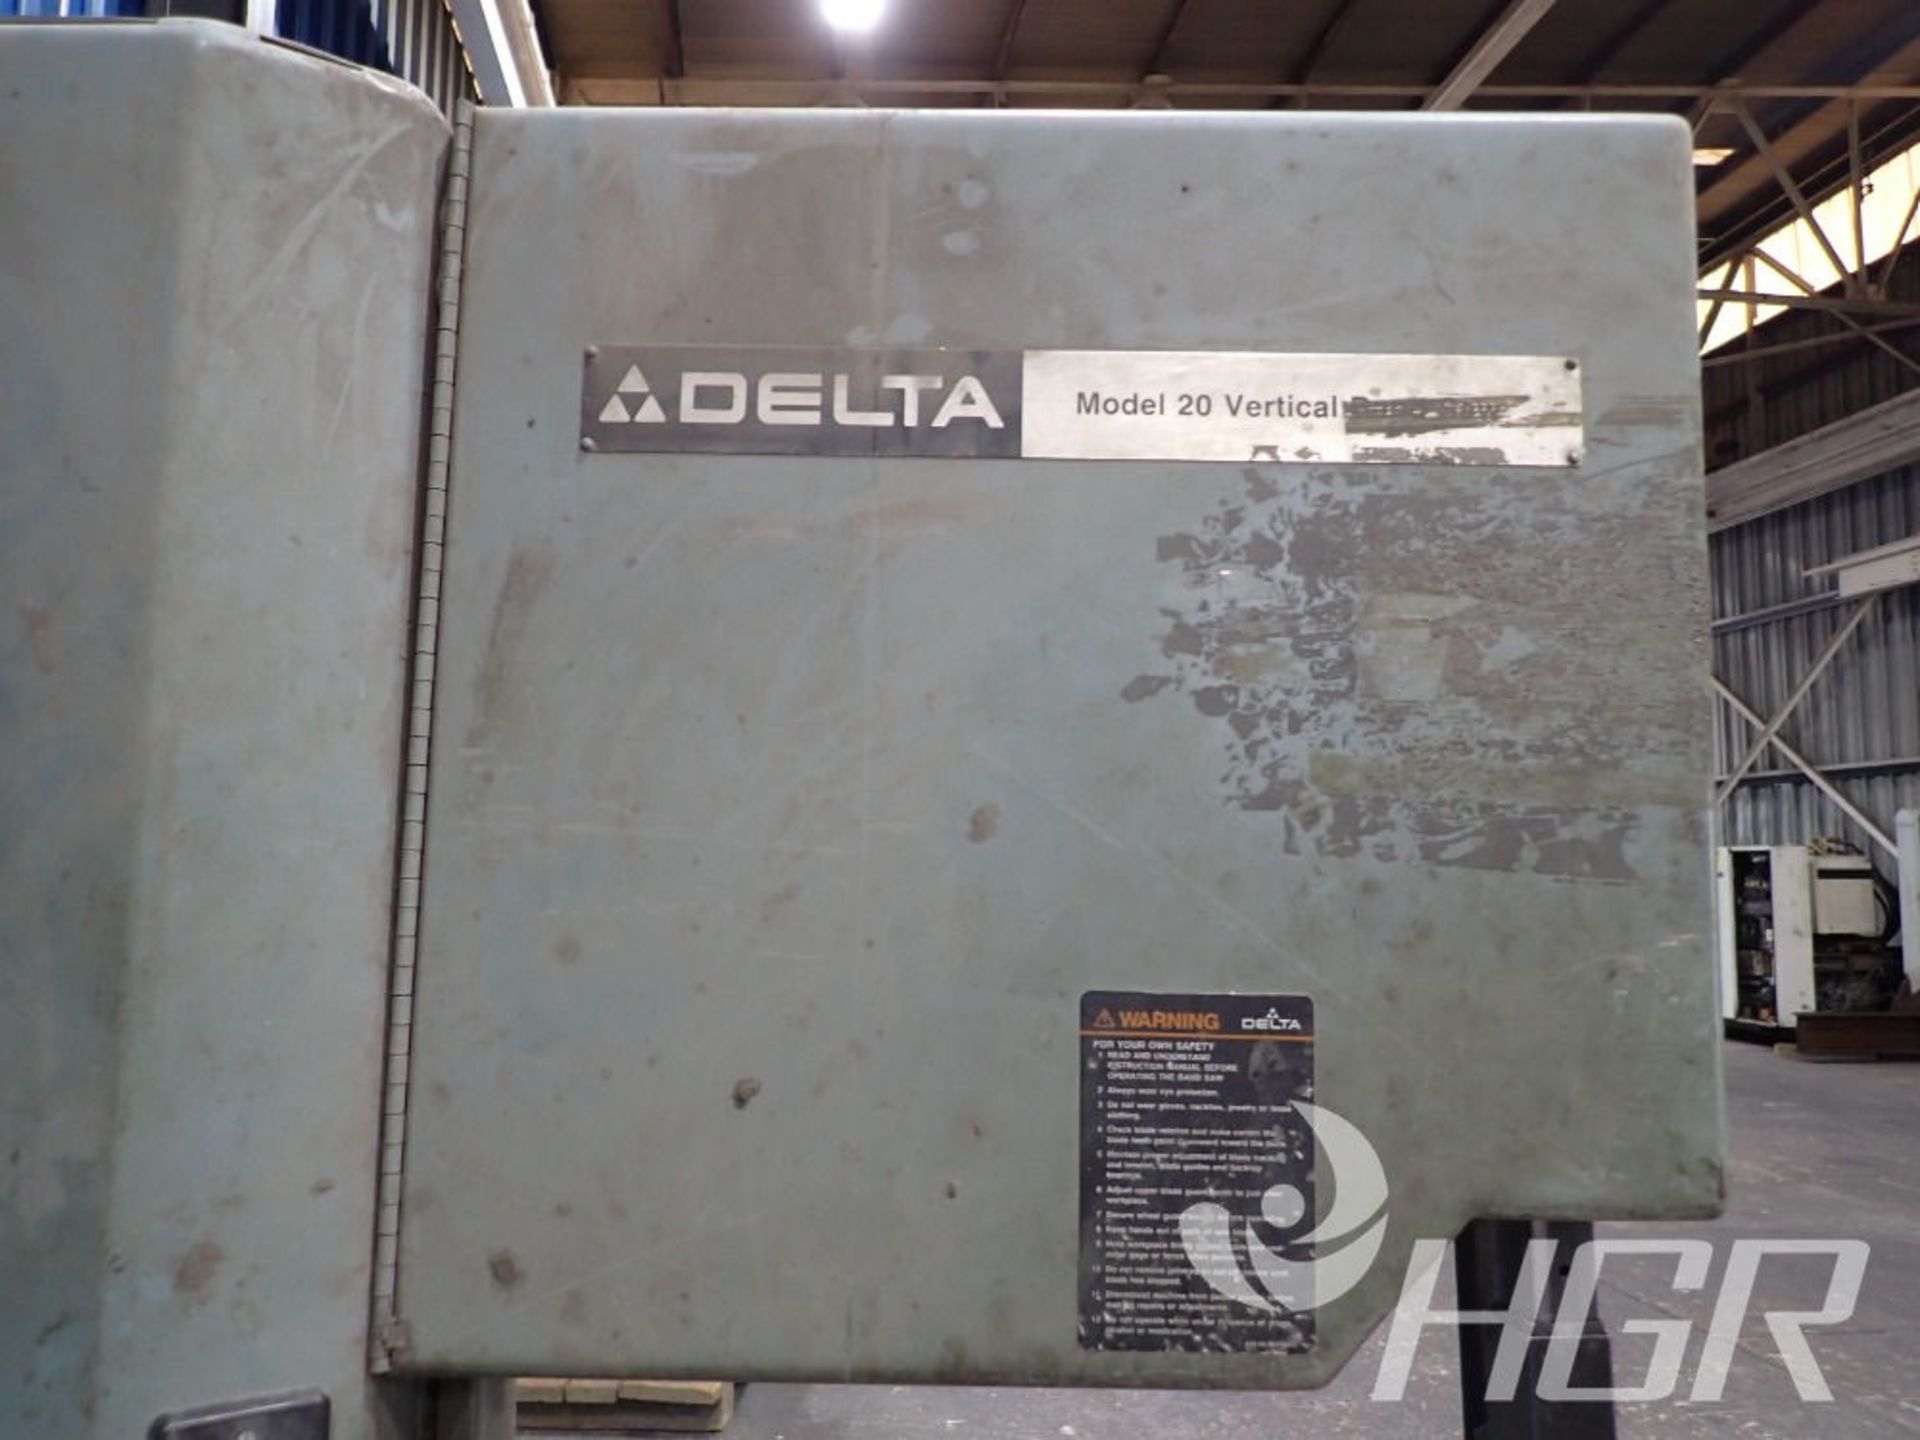 DELTA VERTICAL BAND SAW , Model 28-654, Date: n/a; s/n 88FA2262, Approx. Capacity: 20X8, Power: 3/ - Image 4 of 8